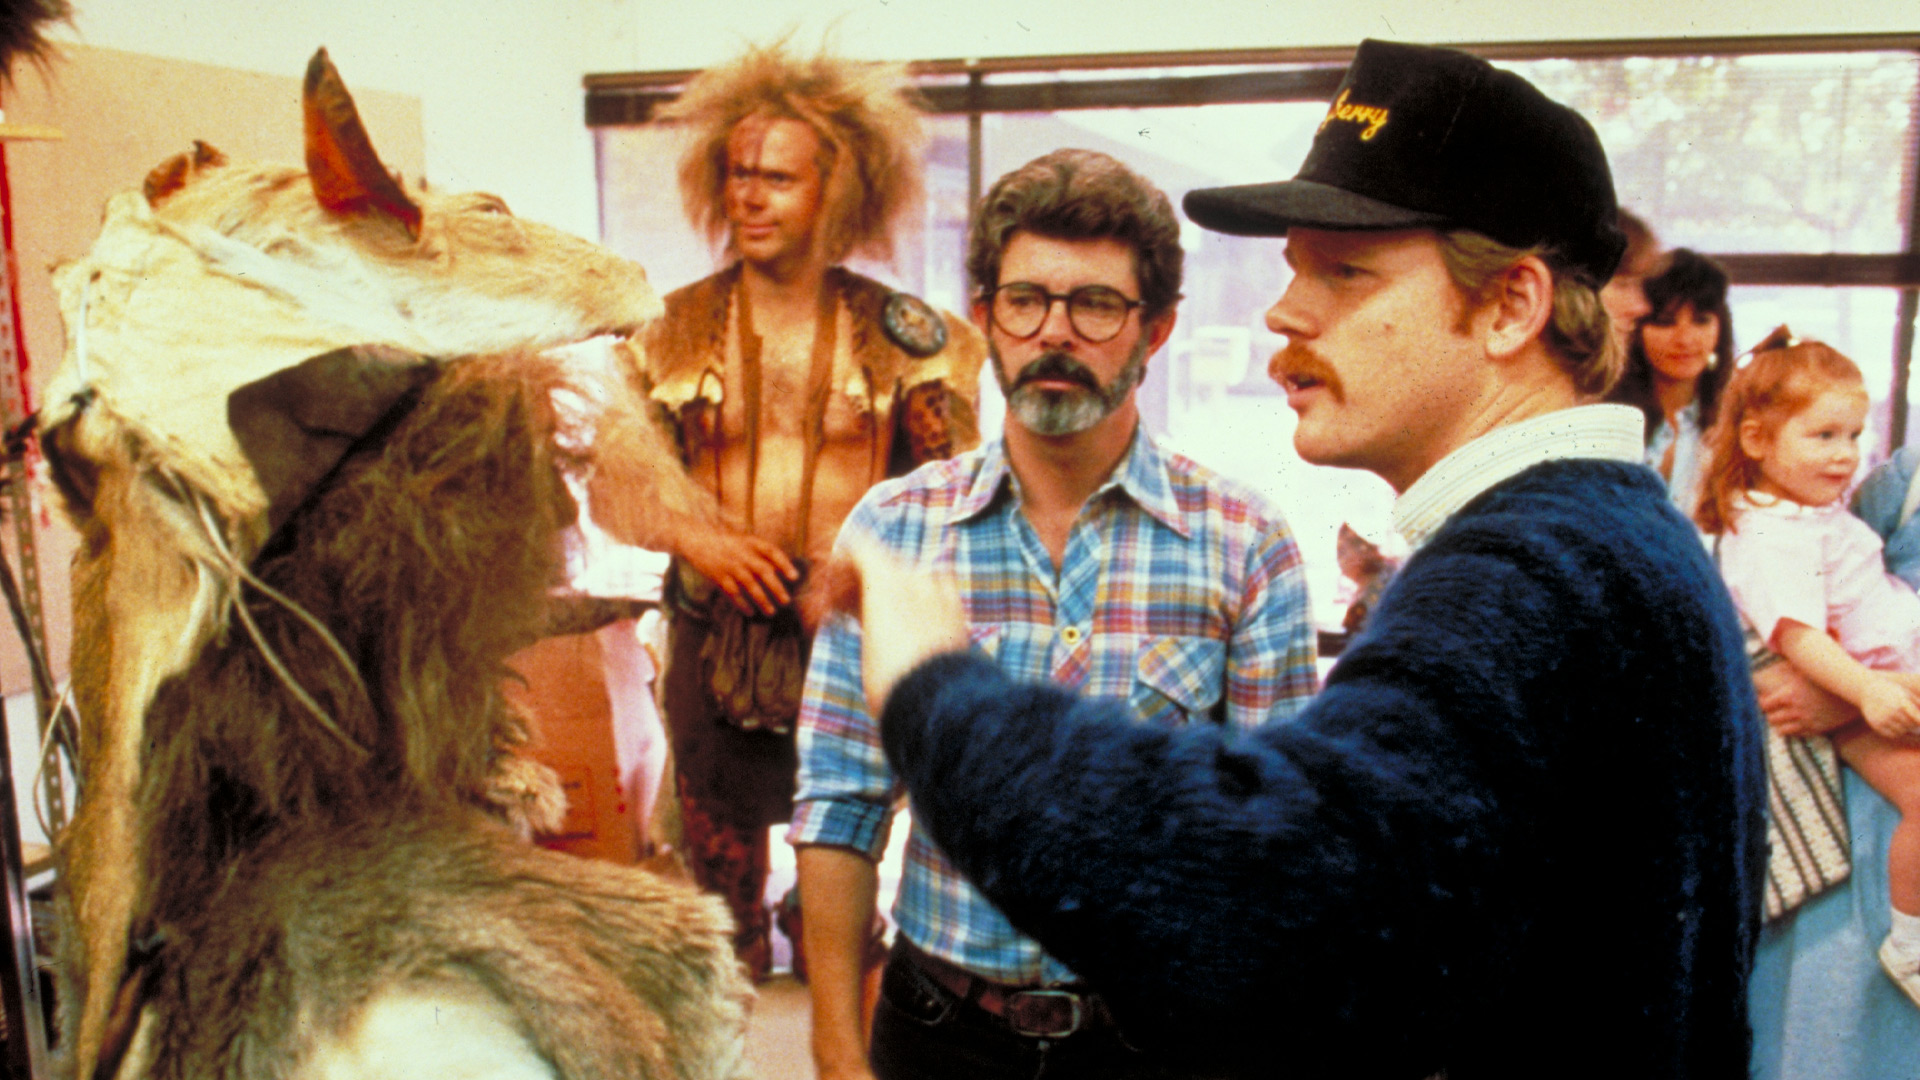 Ron Howard and George Lucas looking at brownie costumes